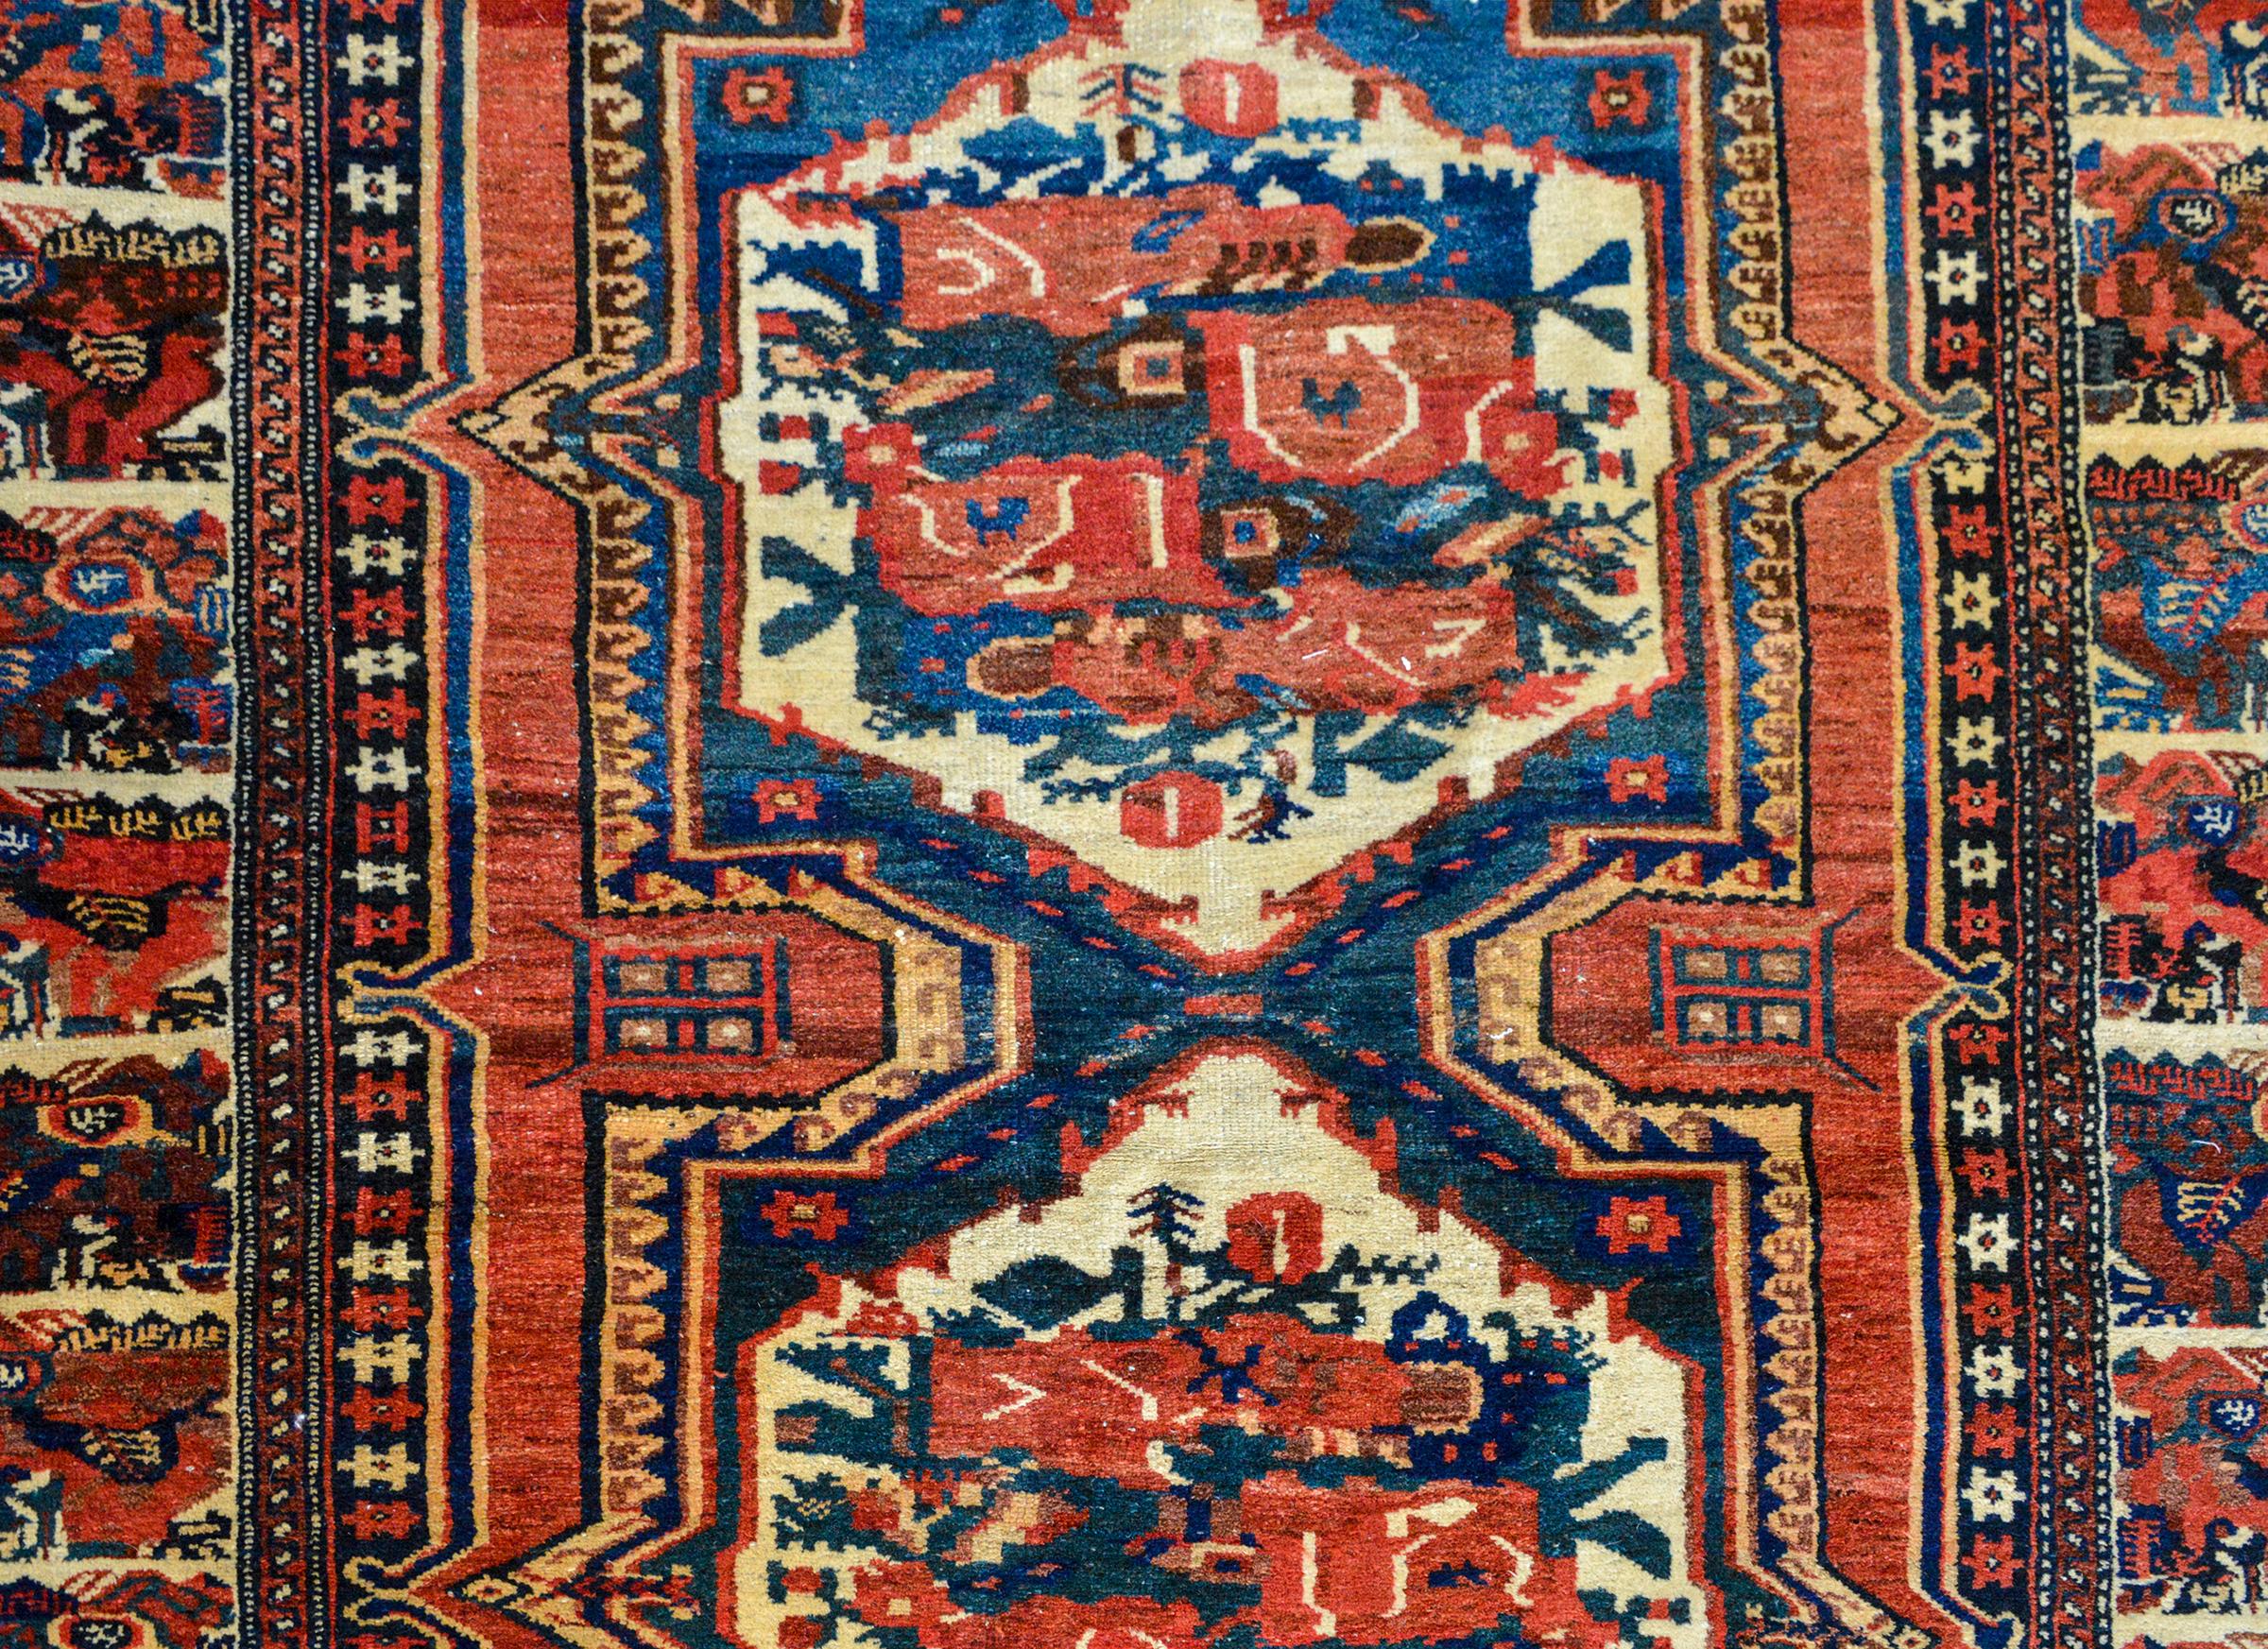 An outstanding early 20th century Persian Bakhtiari rug with two large central stylized floral medallions woven in crimson, blues, creams, and golds, and surrounded by a wonderfully woven border containing dozens of more stylized flowers.